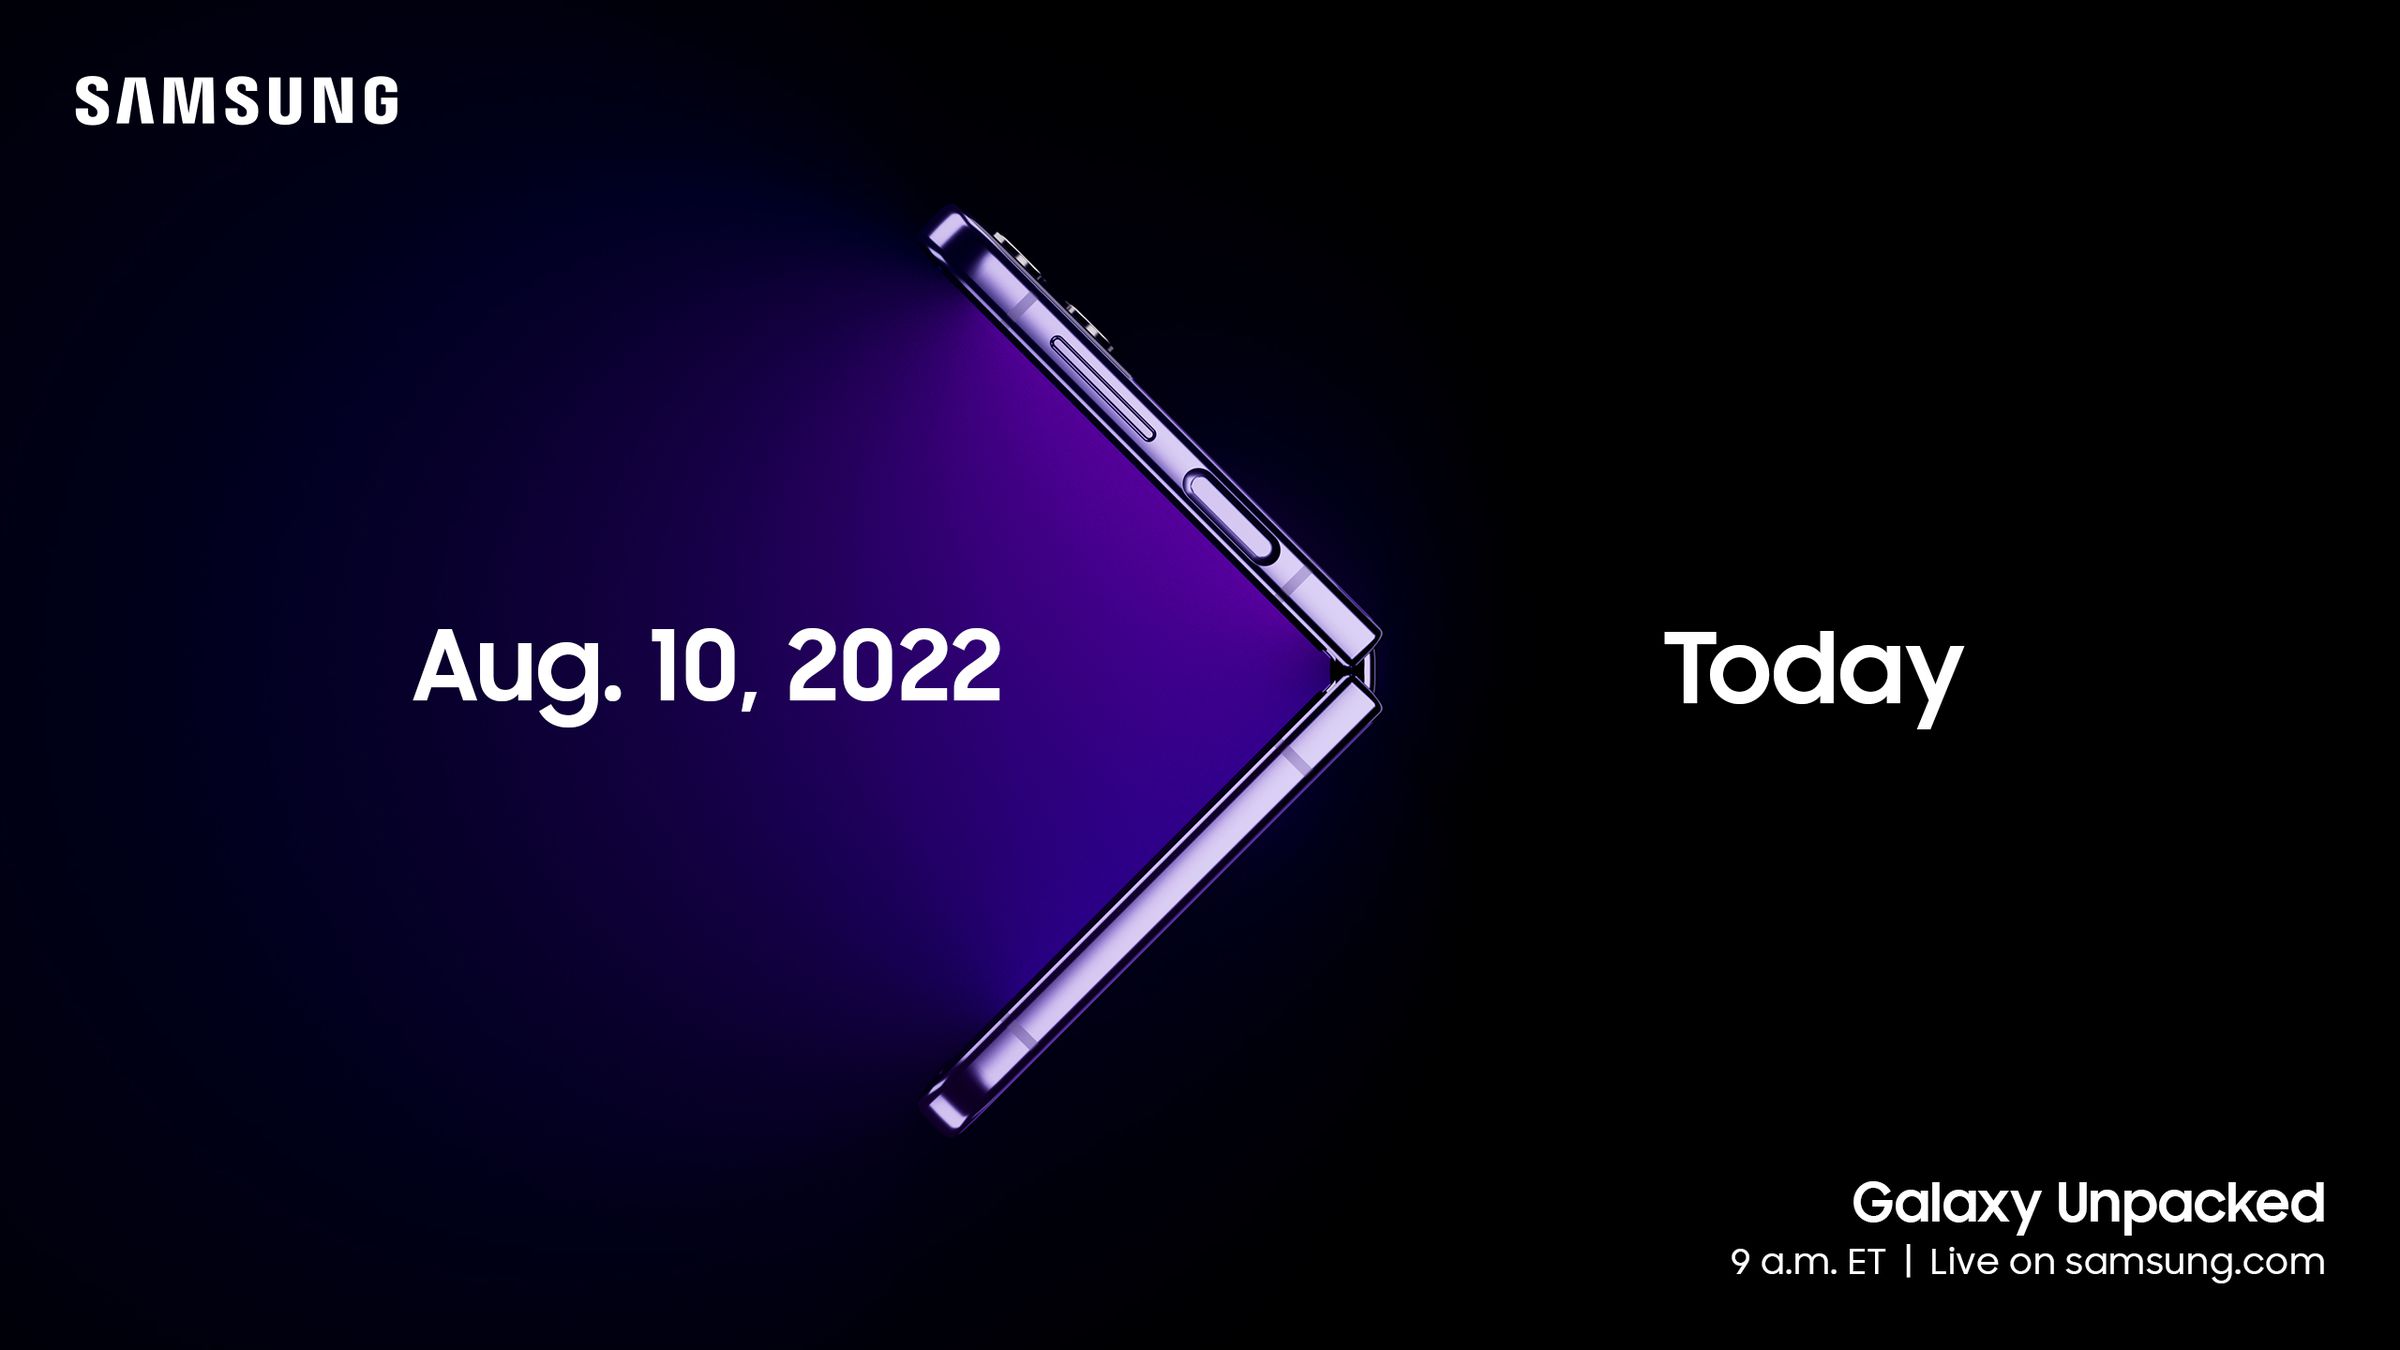 A teaser promo image of the upcoming Samsung Unpacked event invite, scheduled for 9AM ET / 6AM PT on August 10th.